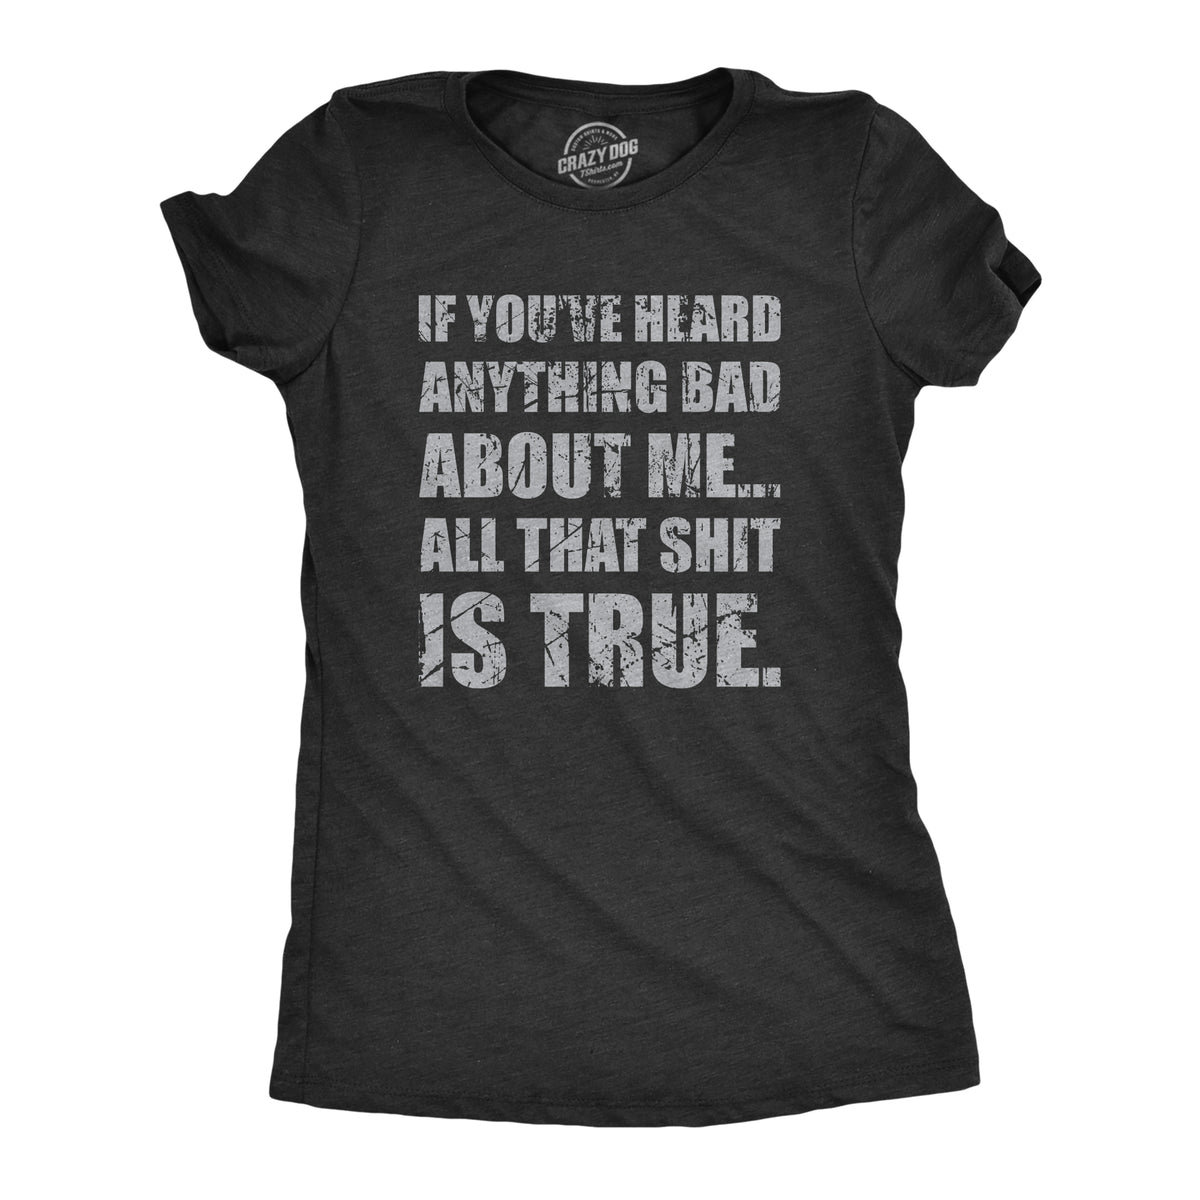 Funny Heather Black - HEARD If You’ve Heard Anything Bad About Me Womens T Shirt Nerdy Sarcastic Tee